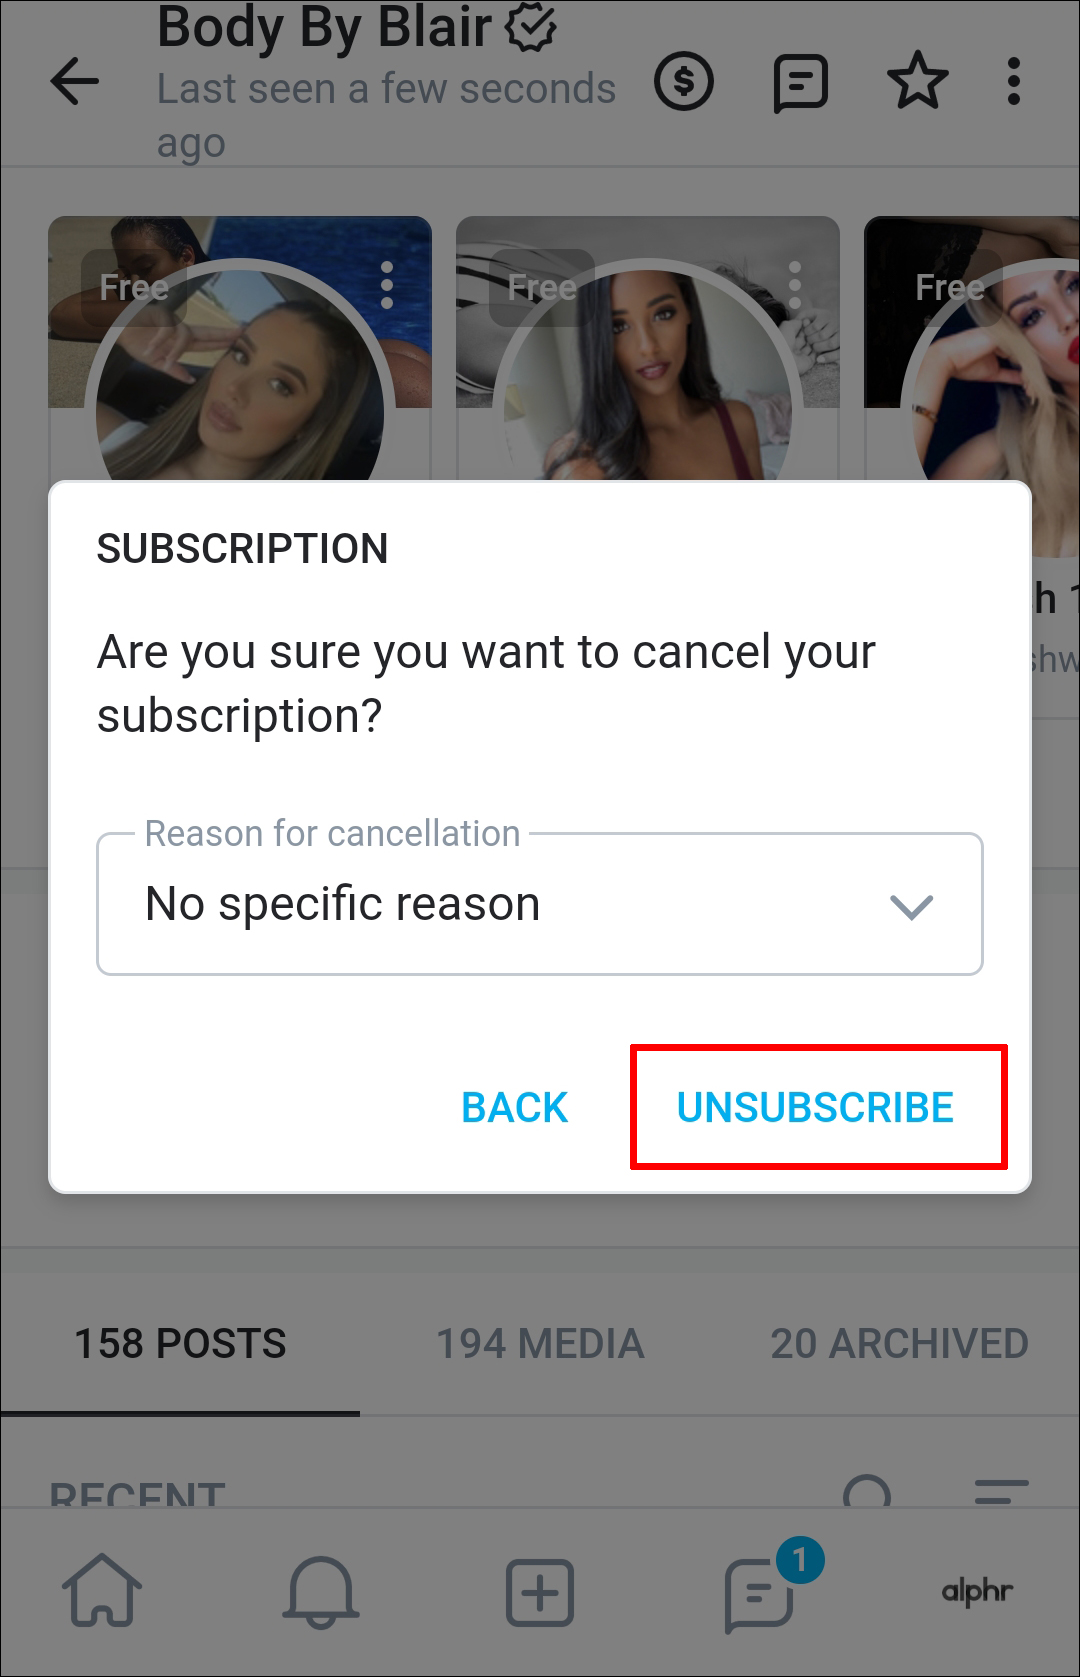 Subscribe to/Unsubscribe from Feed